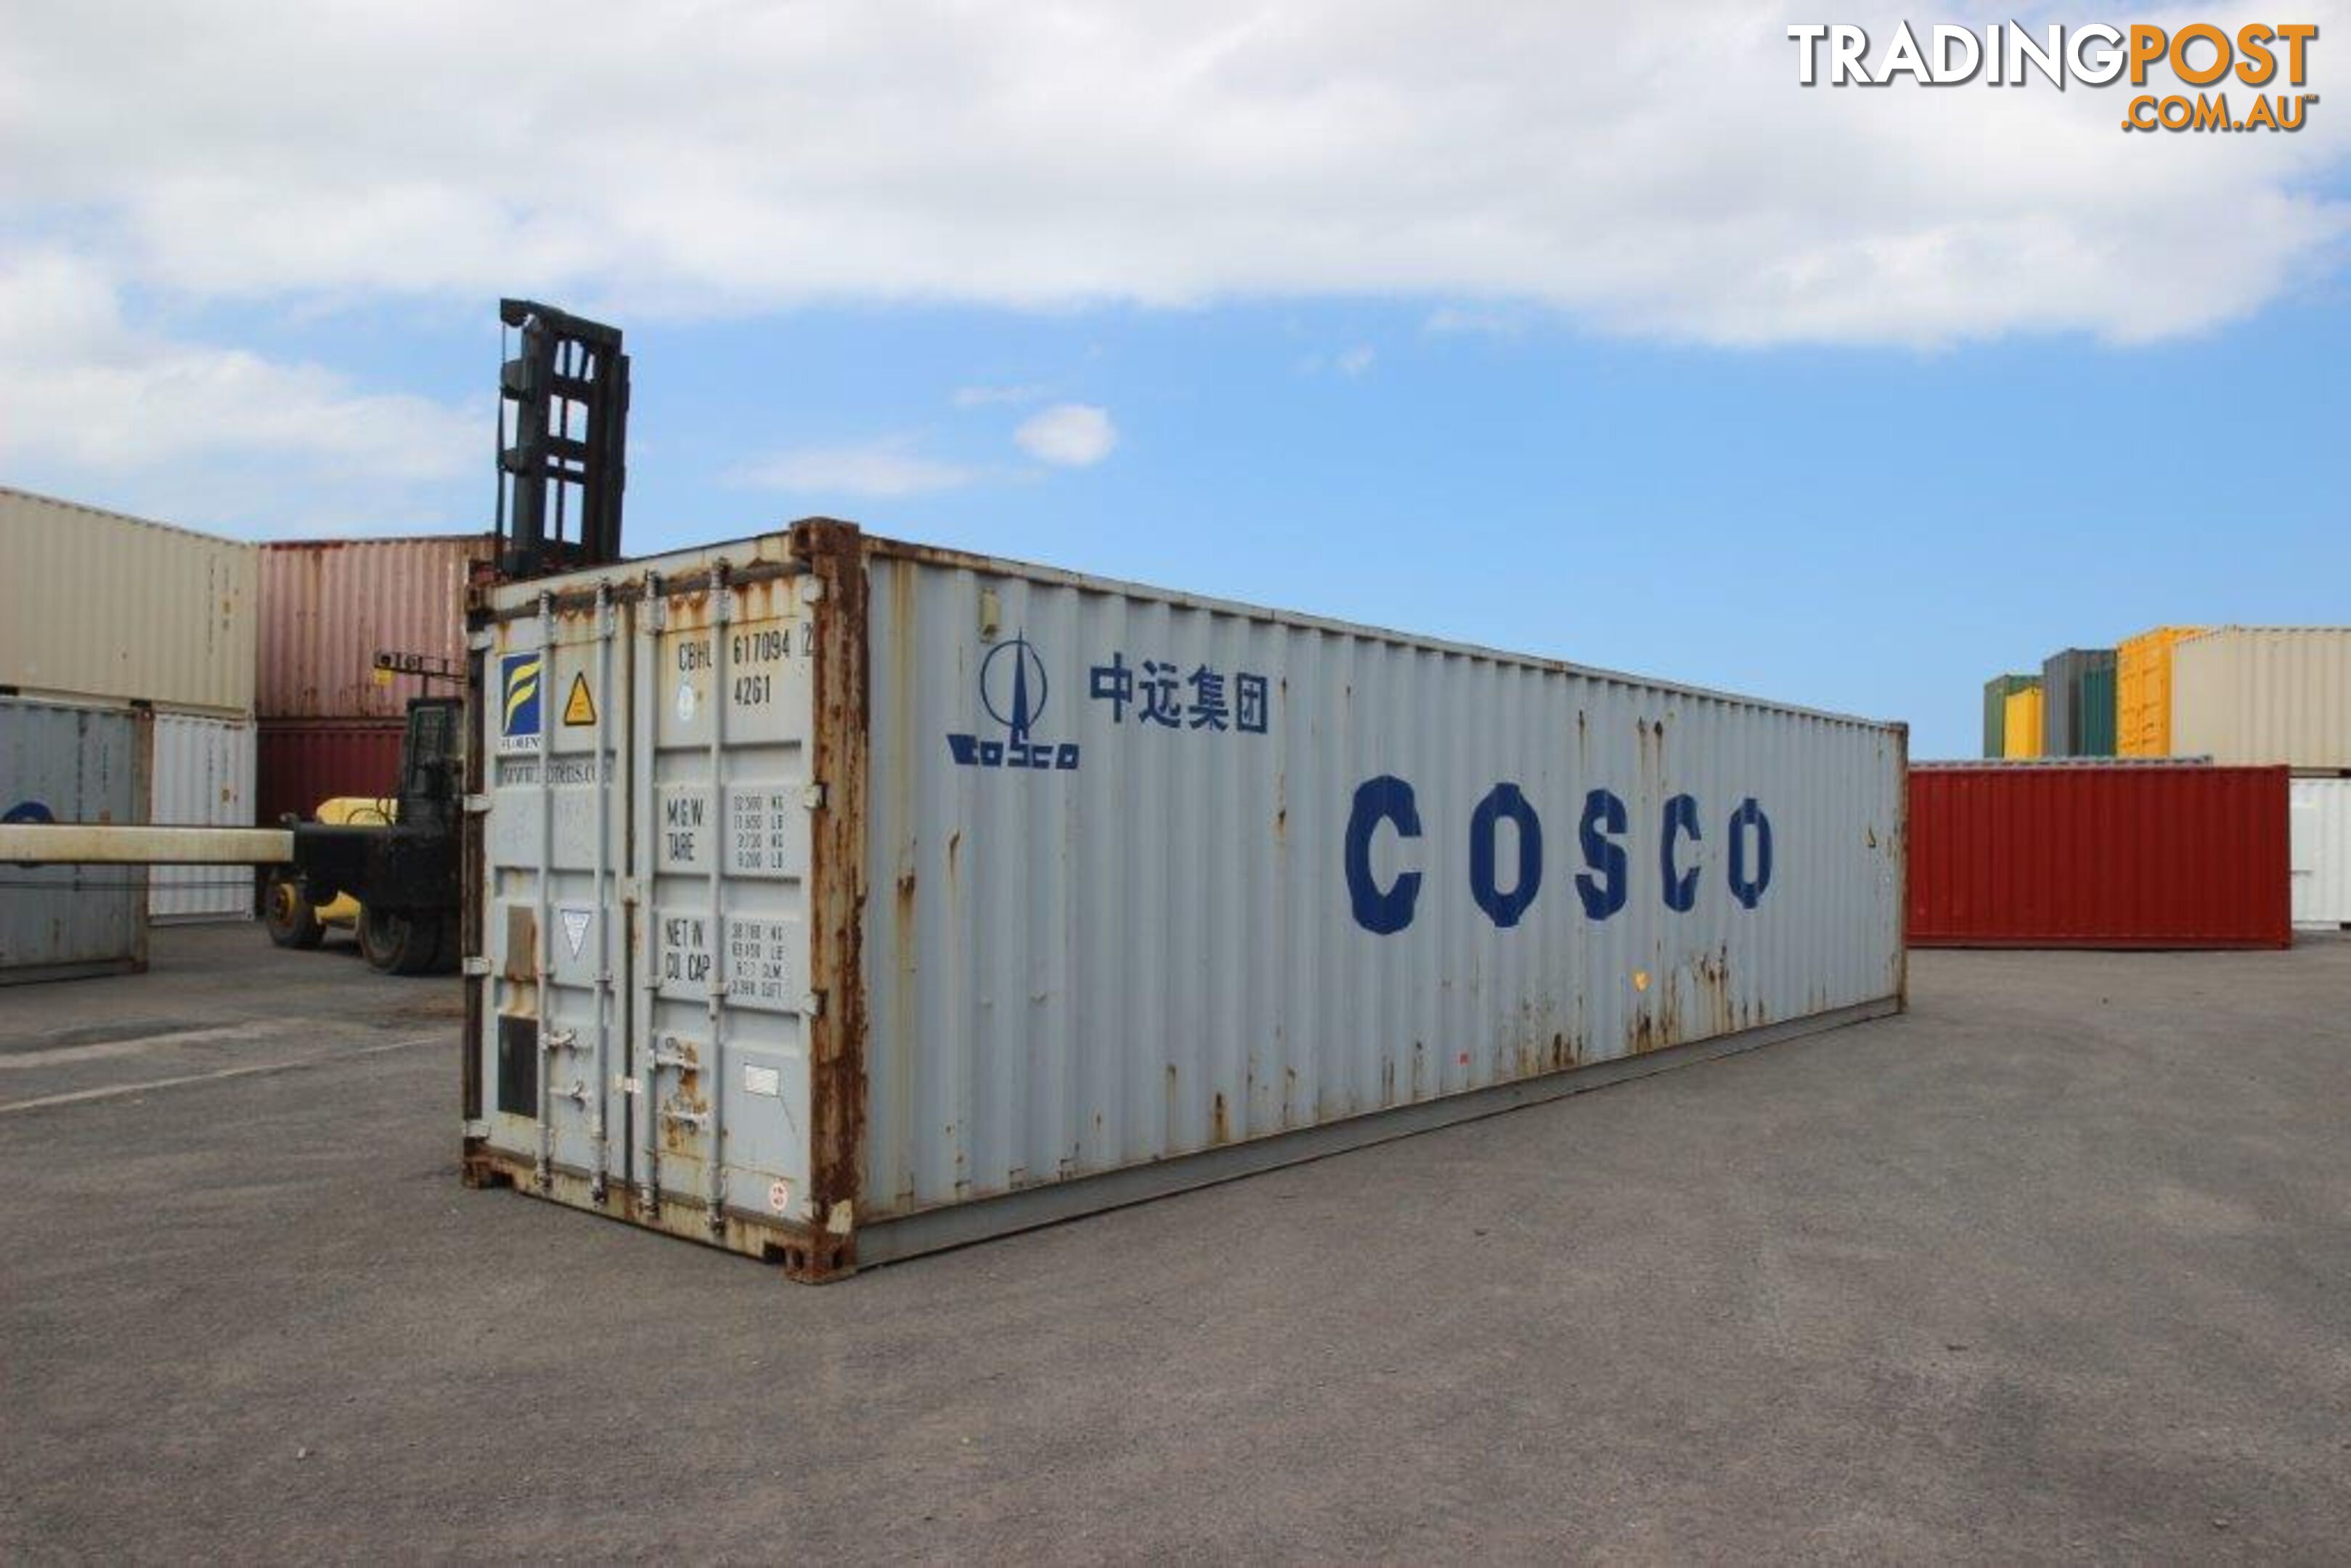 Used 40ft Shipping Containers Rockhampton - From $3150 + GST